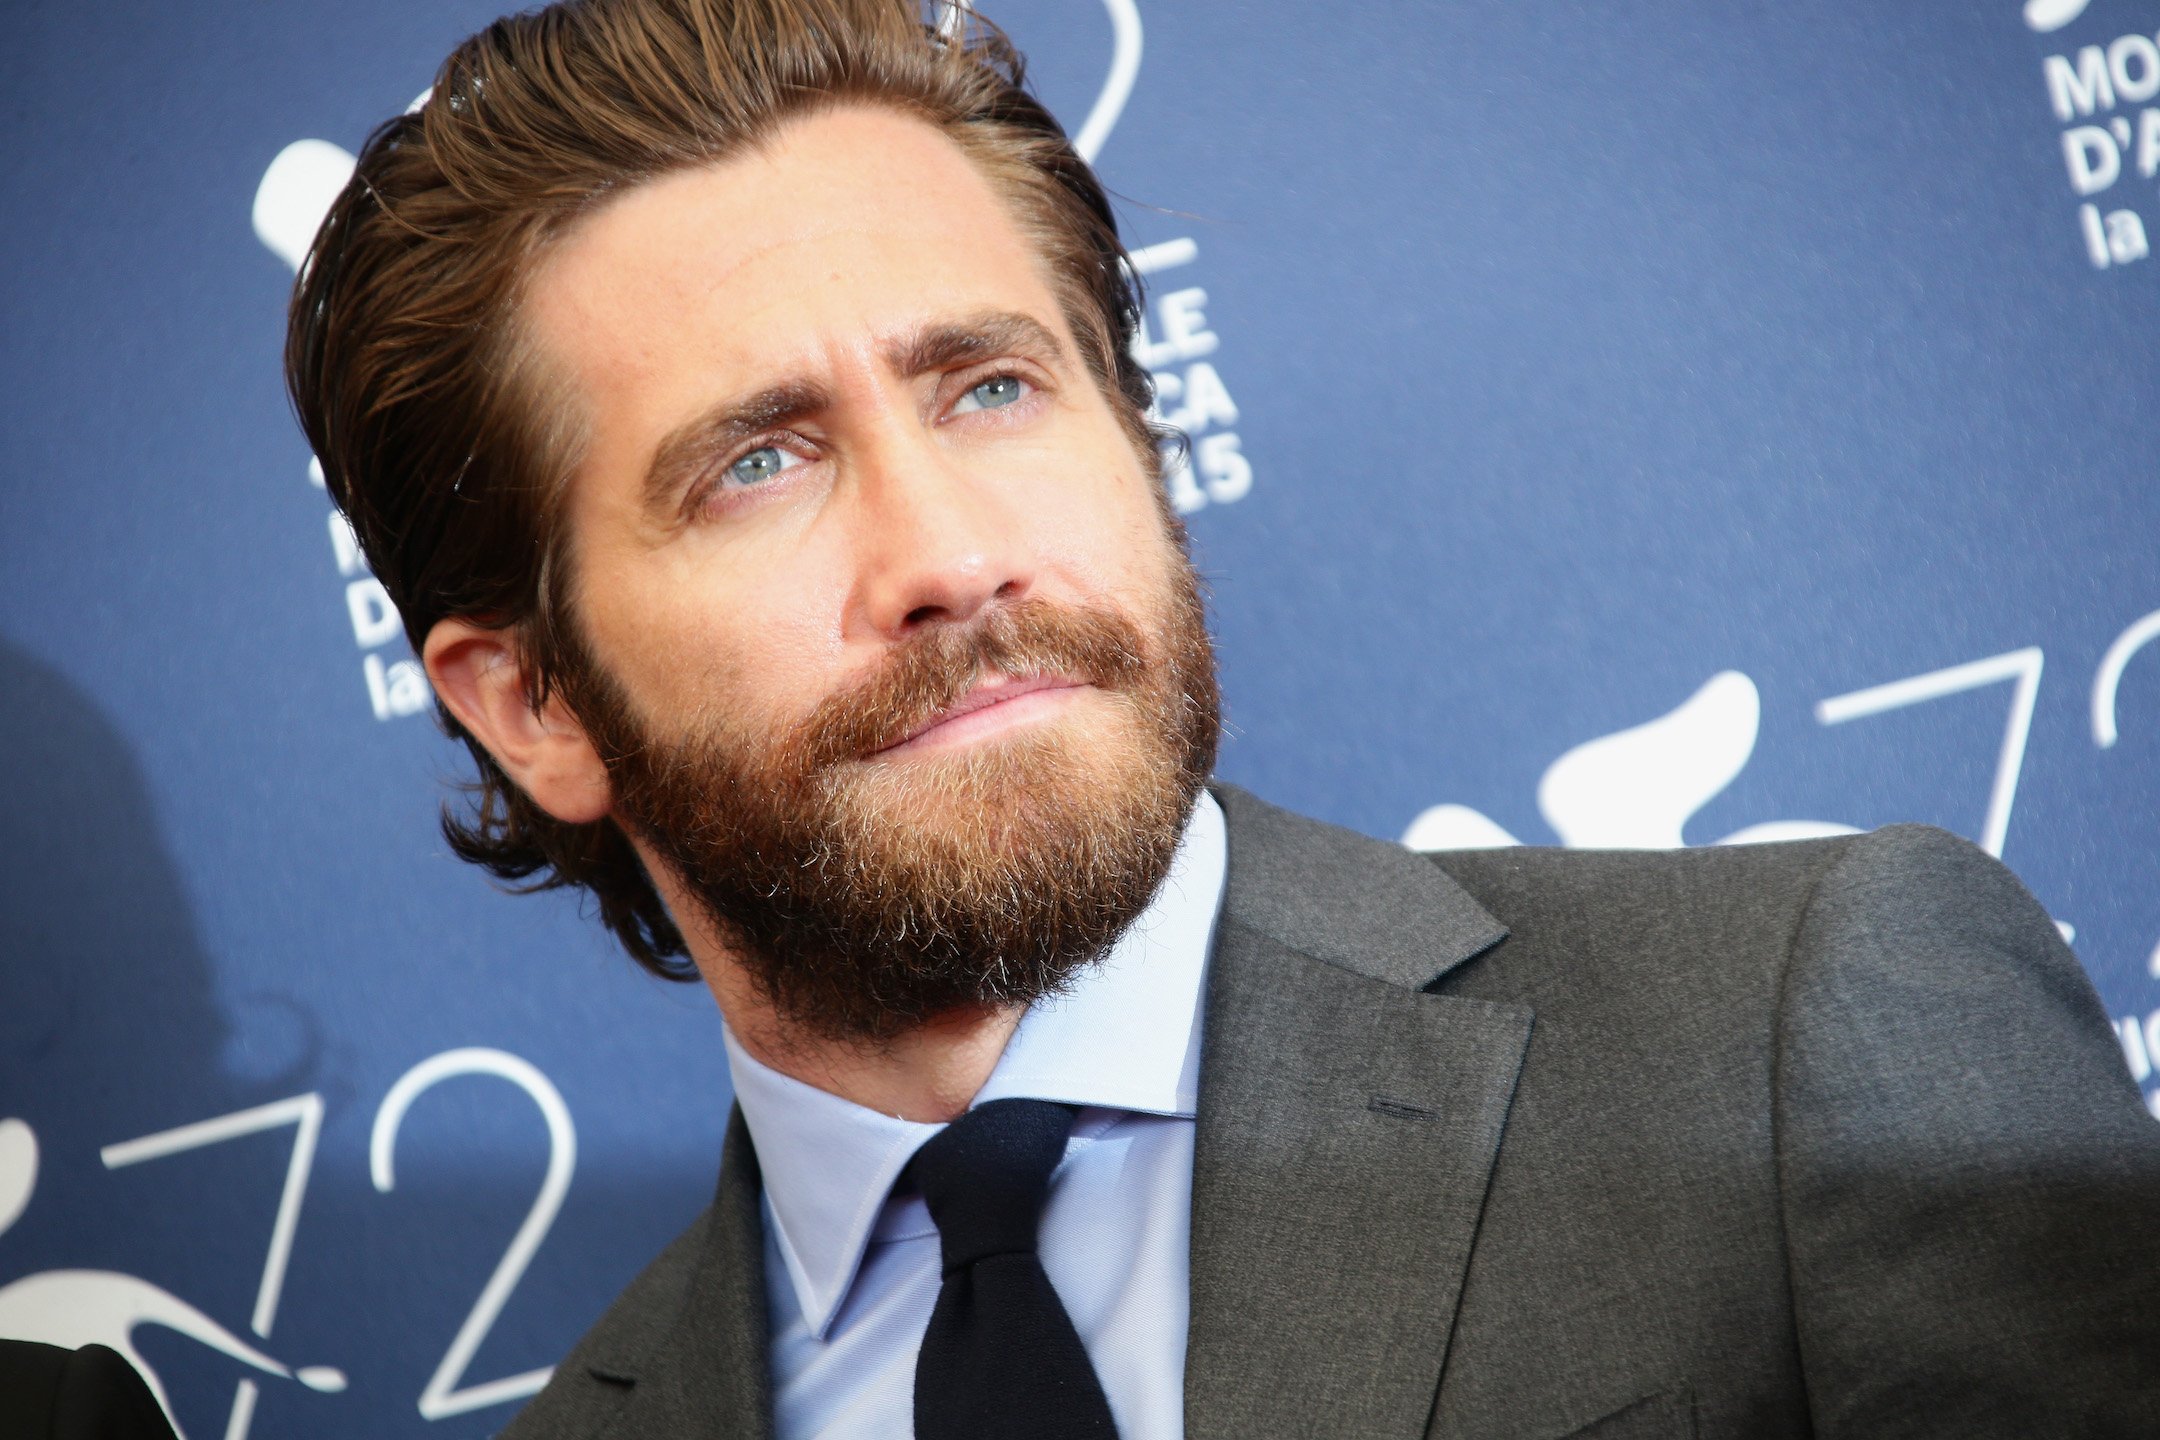 Viewers Think the Jake Gyllenhaal Netflix Movie ‘The Guilty’ is Similar to Halle Berry’s ‘The Call’